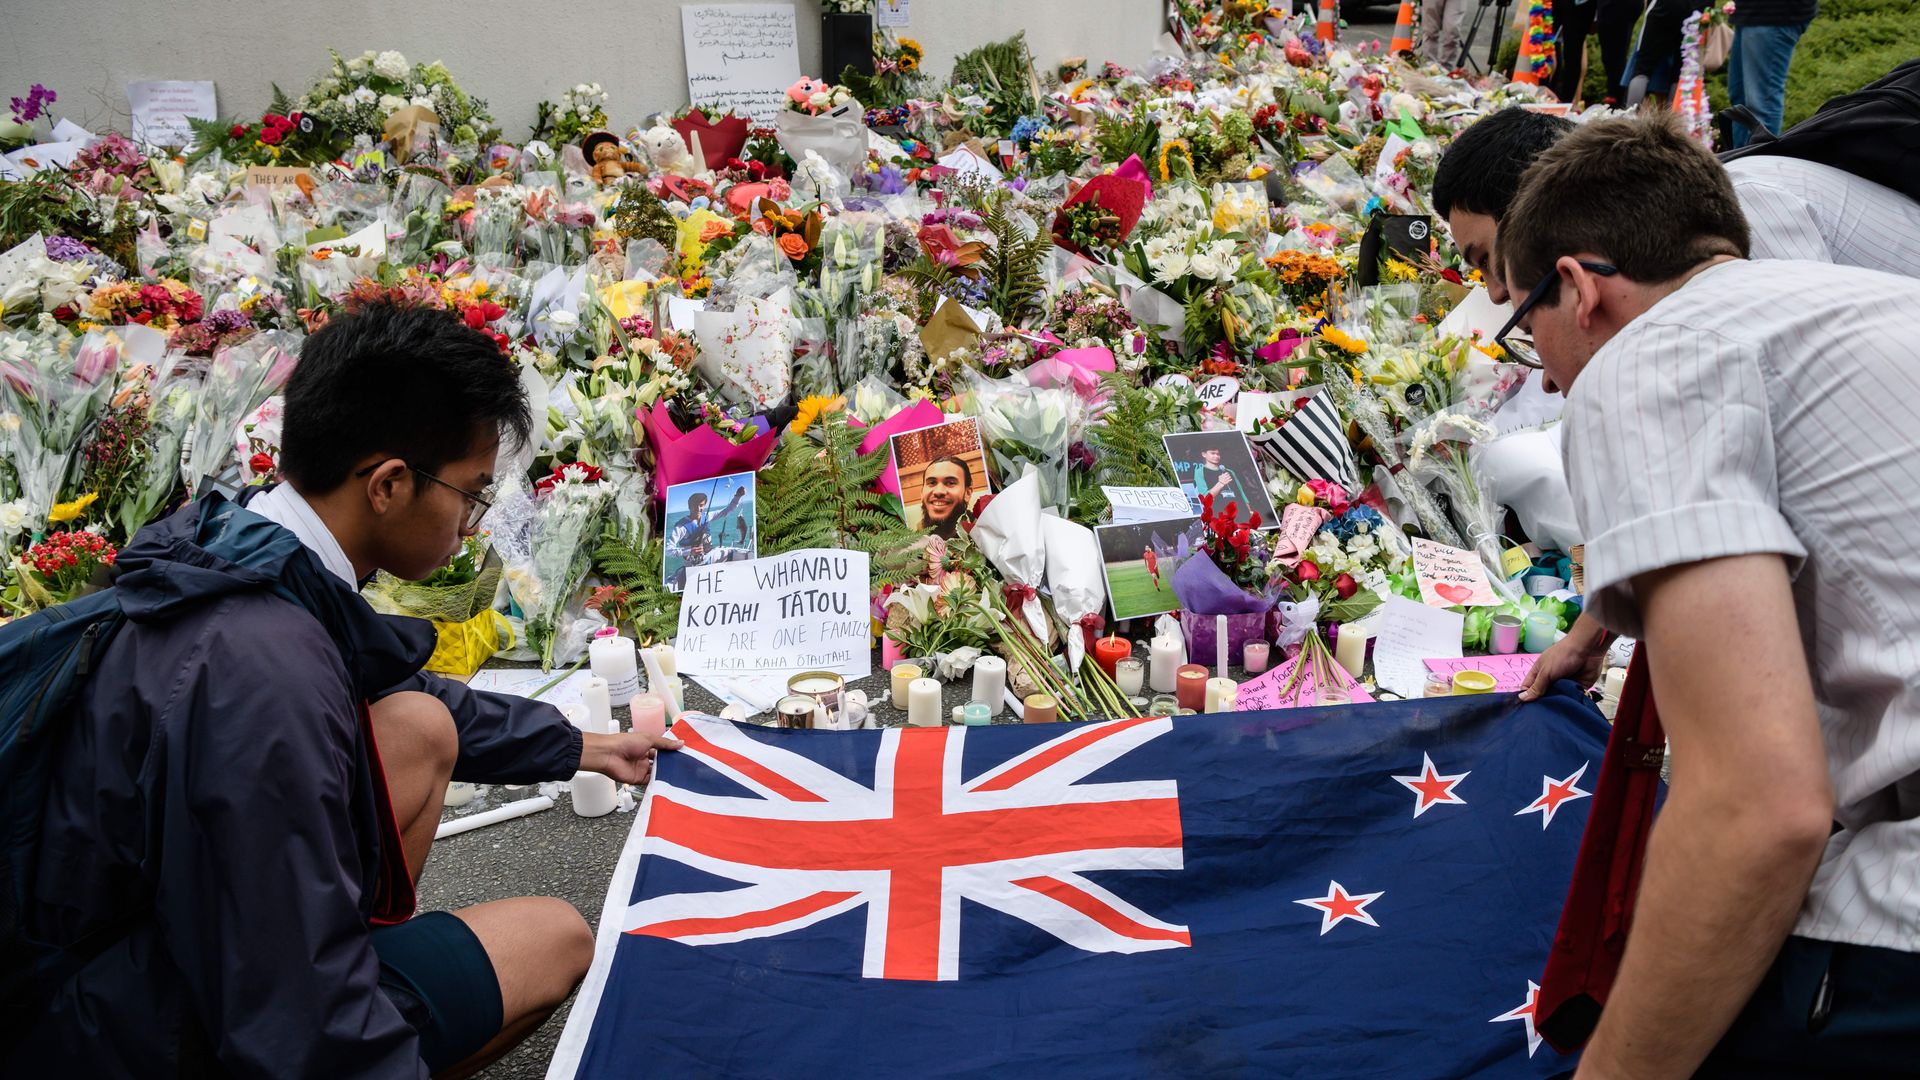 Students display the New Zealand national flag next to flowers during a vigil in Christchurch on March 18, 2019.